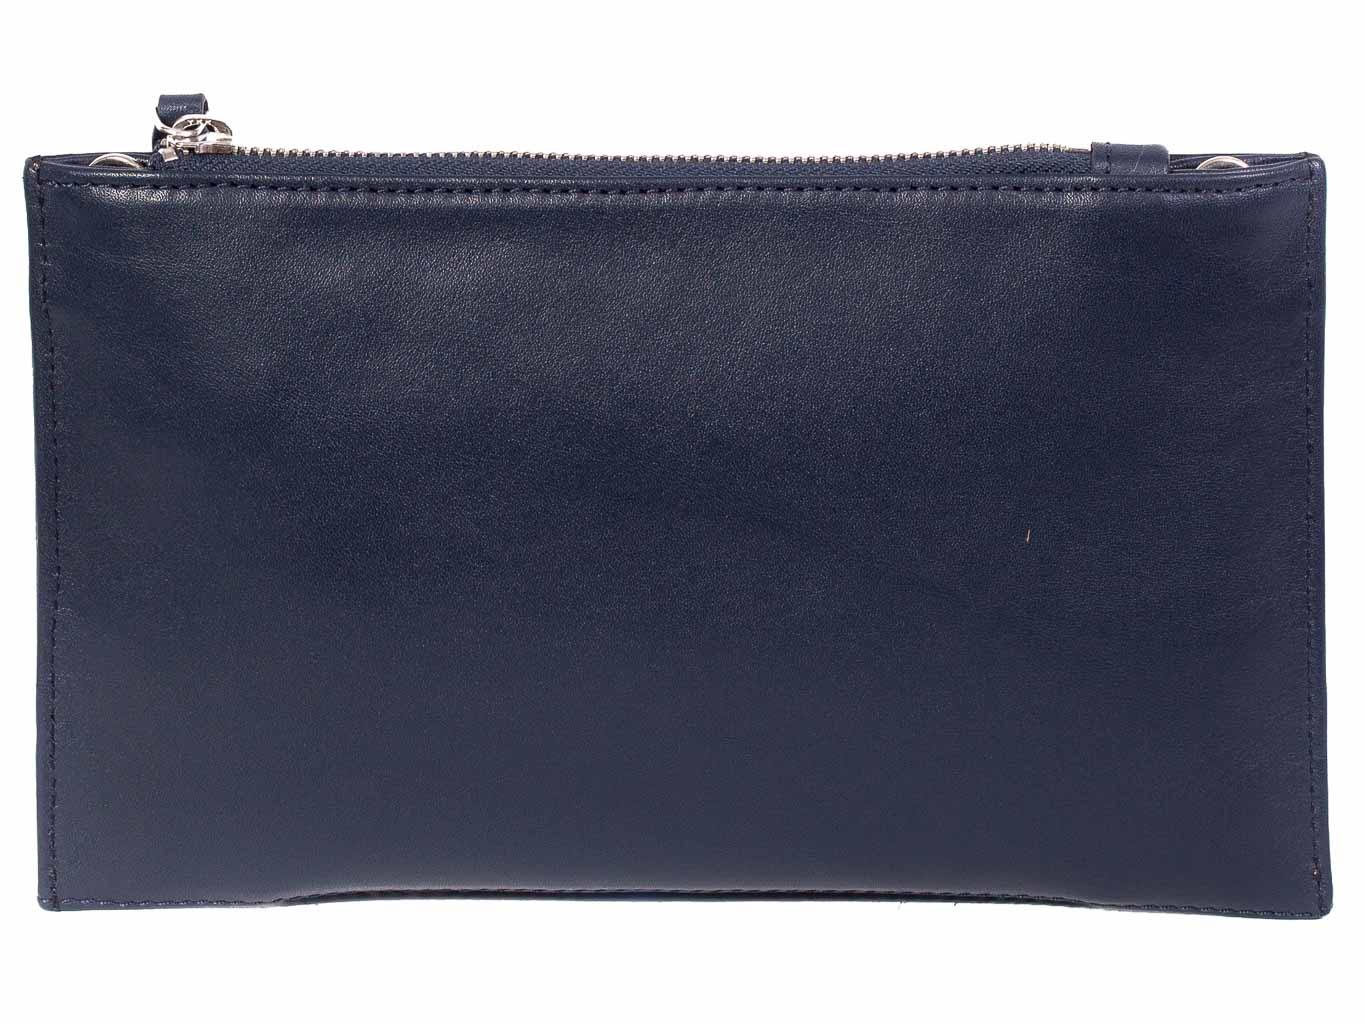 Clutch Springbok Handbag in Navy Blue with a stripe feature by Sherene Melinda back